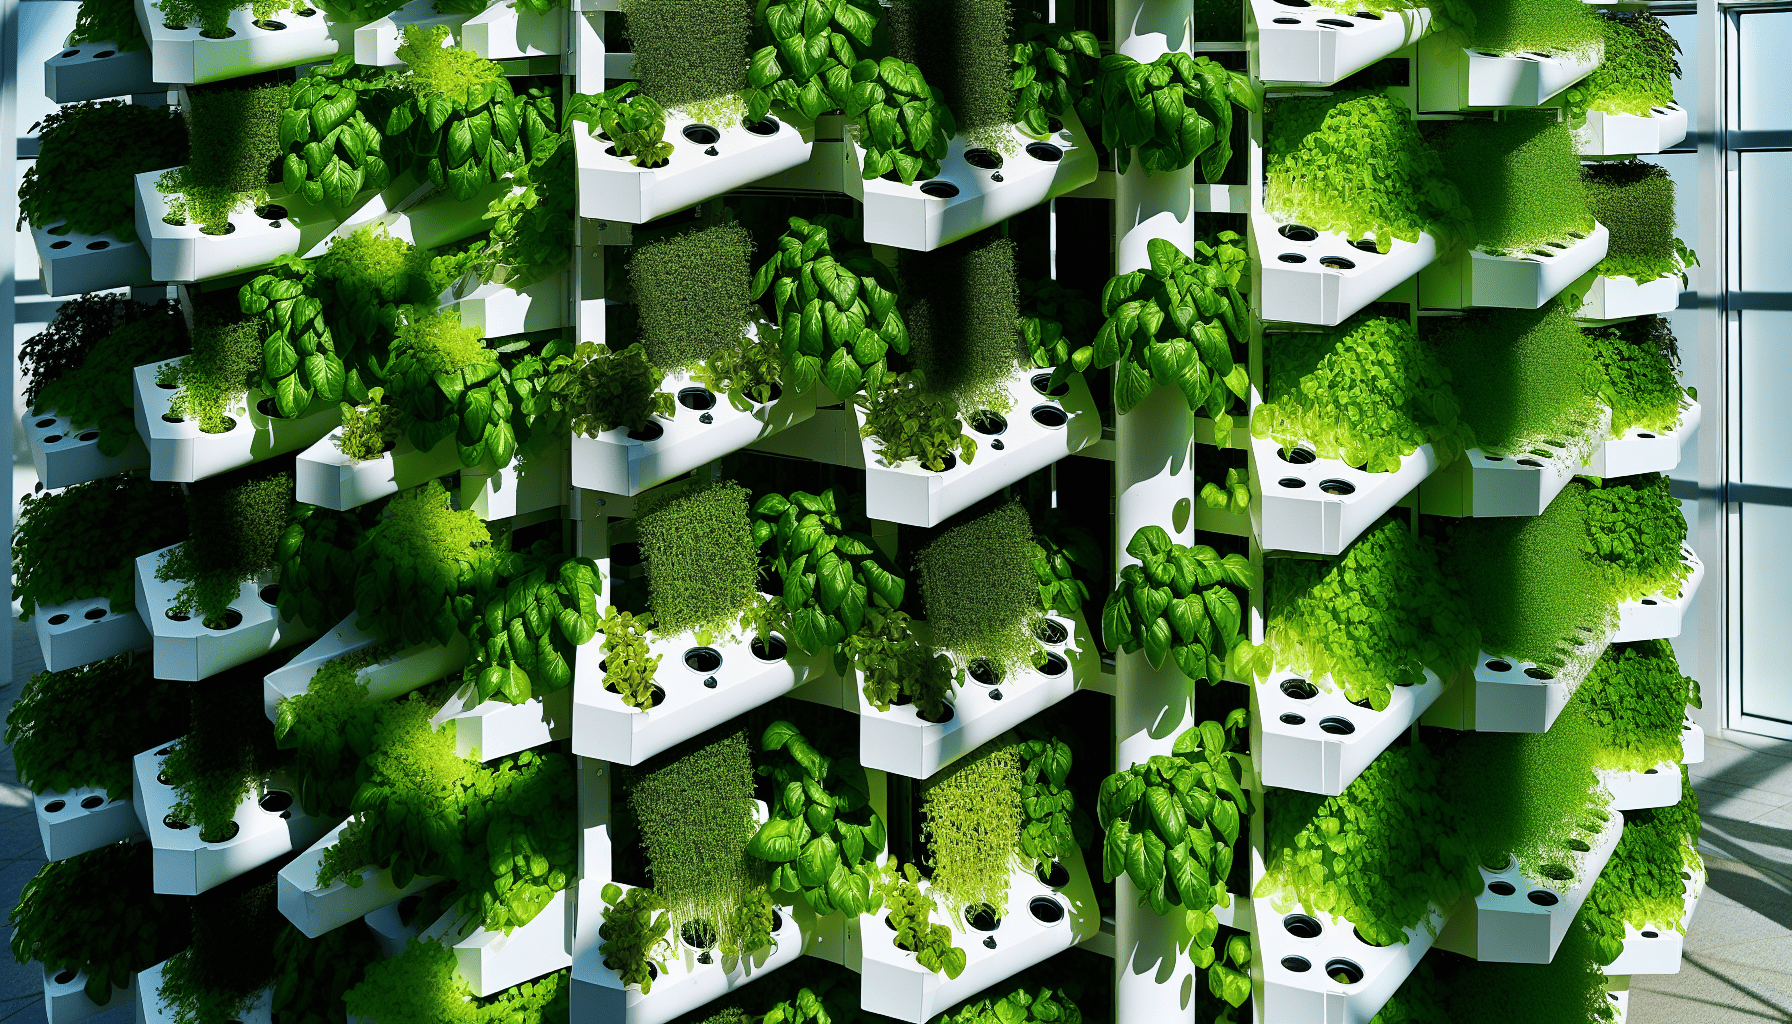 Innovative hydroponic vertical gardens including tower gardens and wall-mounted systems